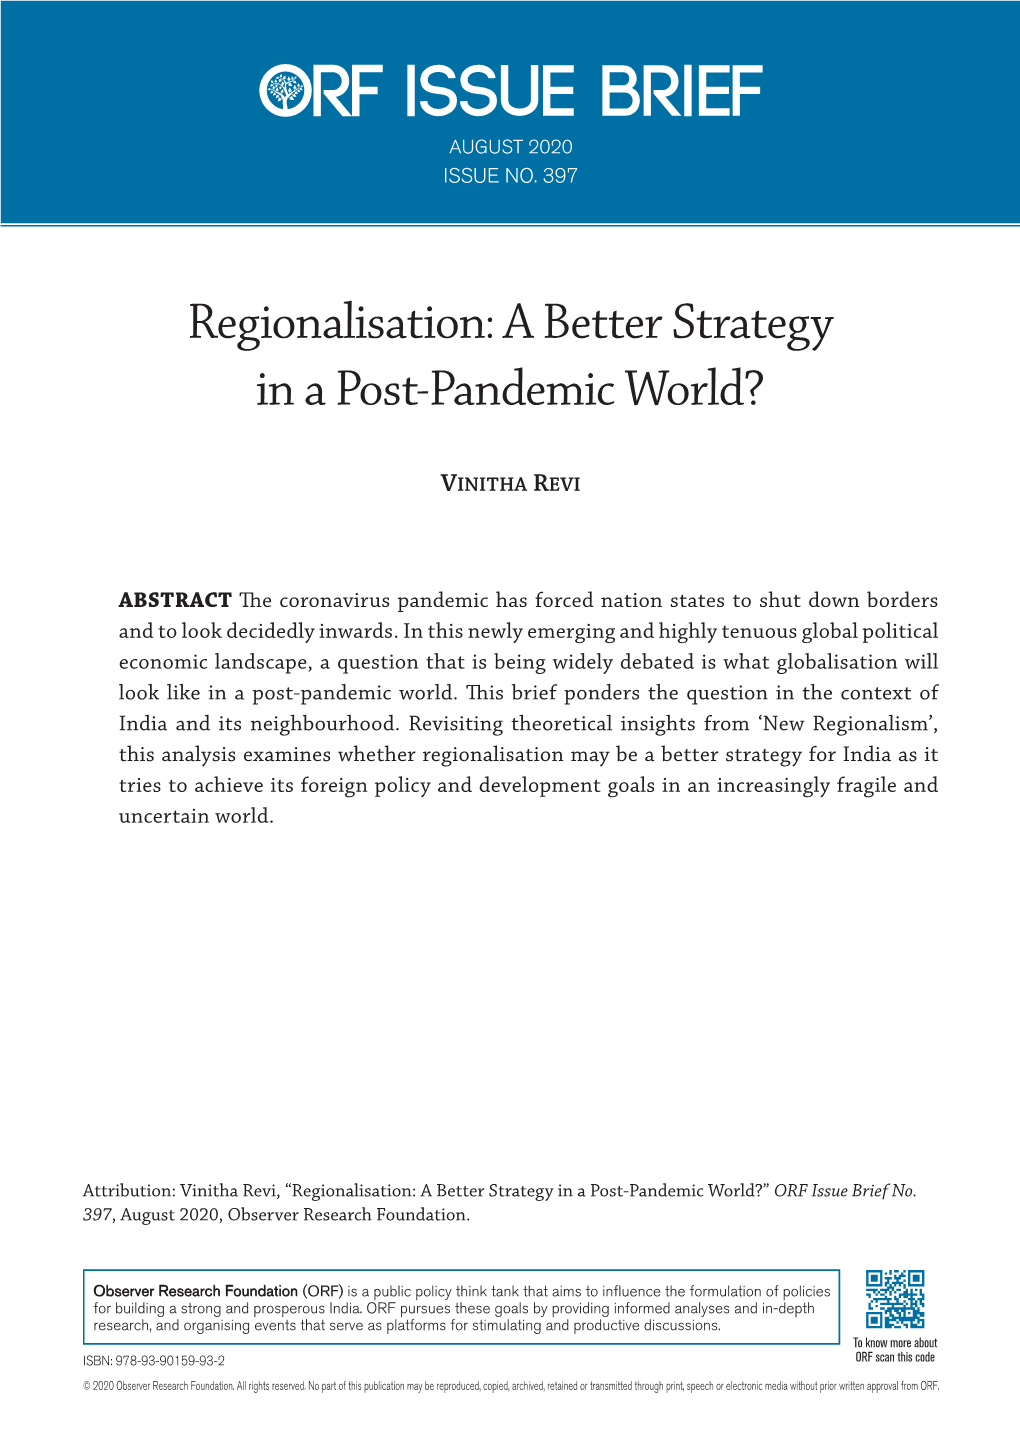 Regionalisation: a Better Strategy in a Post-Pandemic World?